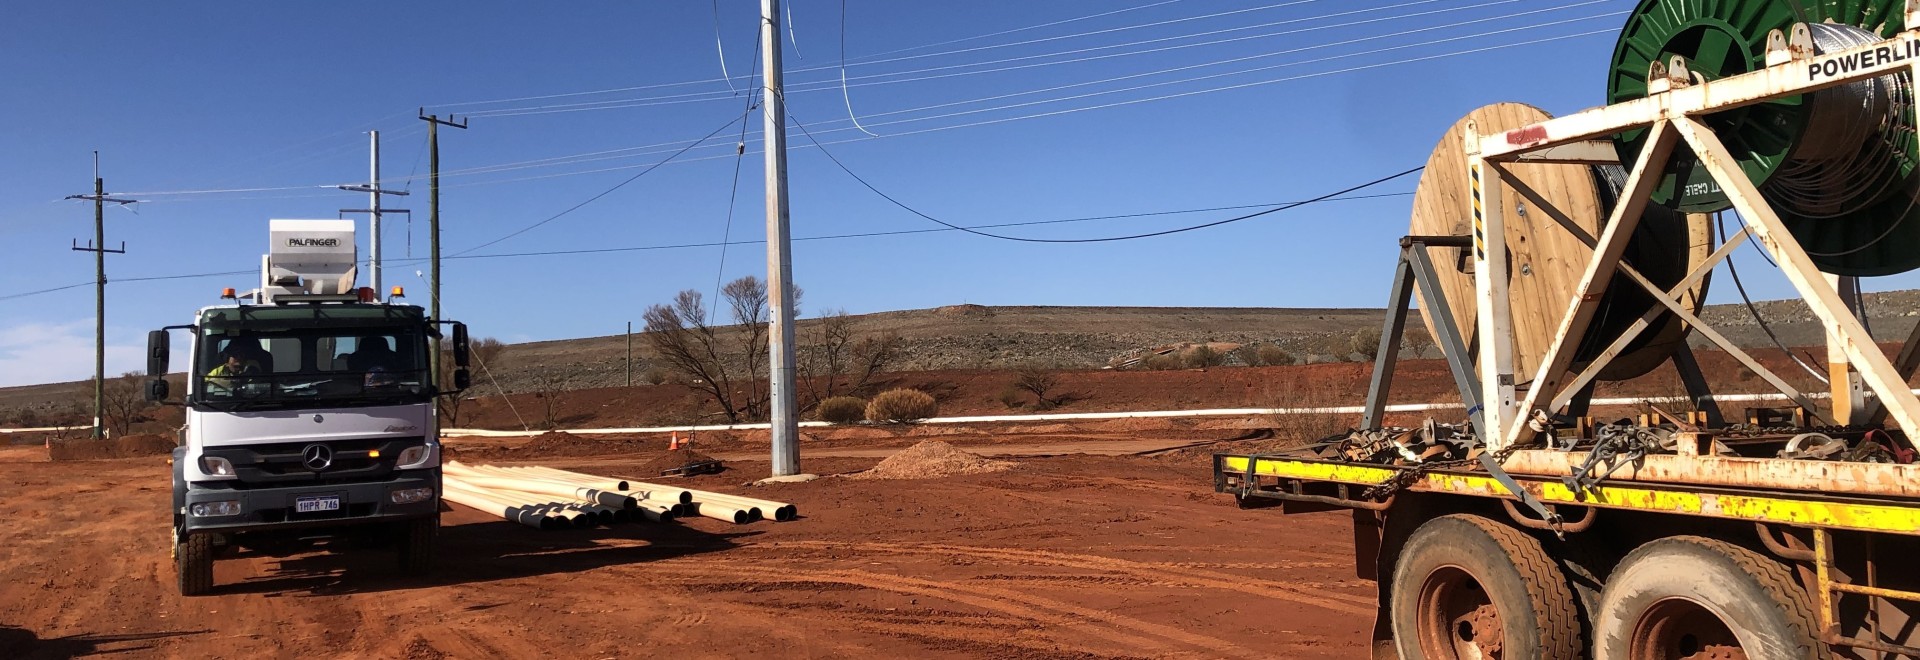 2 Trucks on red dirt next to powerlines